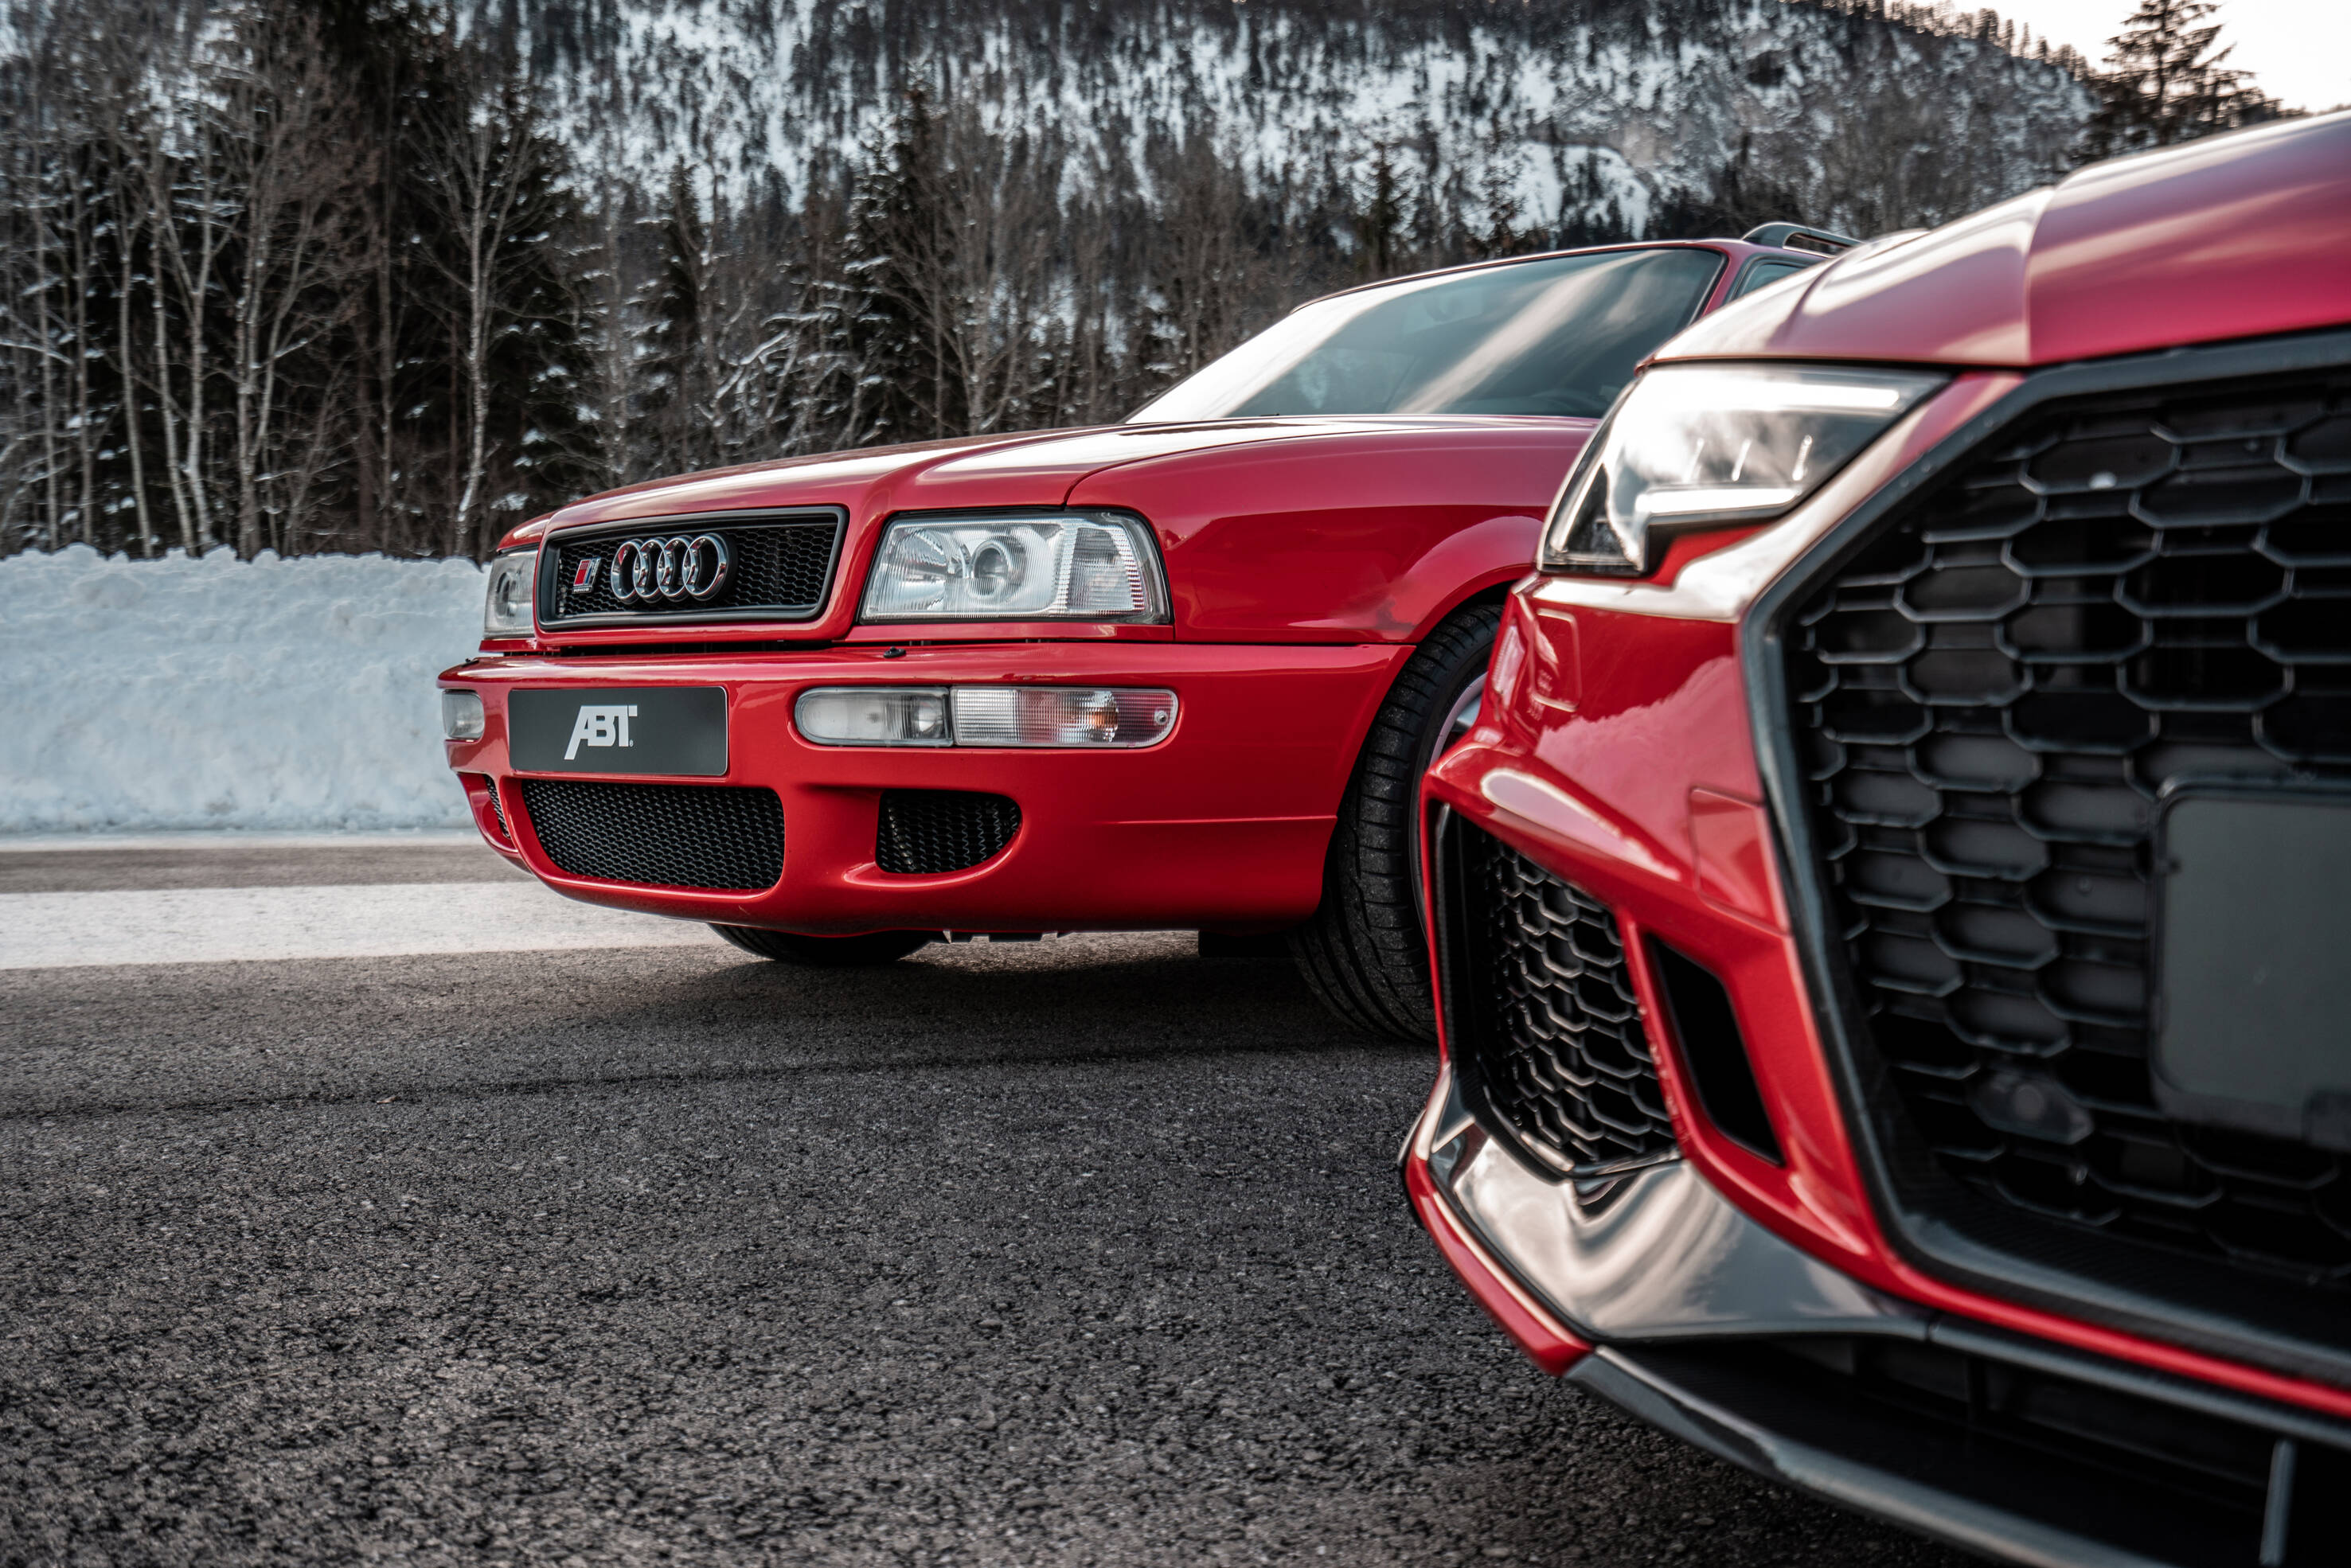 A meeting of generations: 25 years of RS models by ABT Sportsline - Audi  Tuning, VW Tuning, Chiptuning von ABT Sportsline.